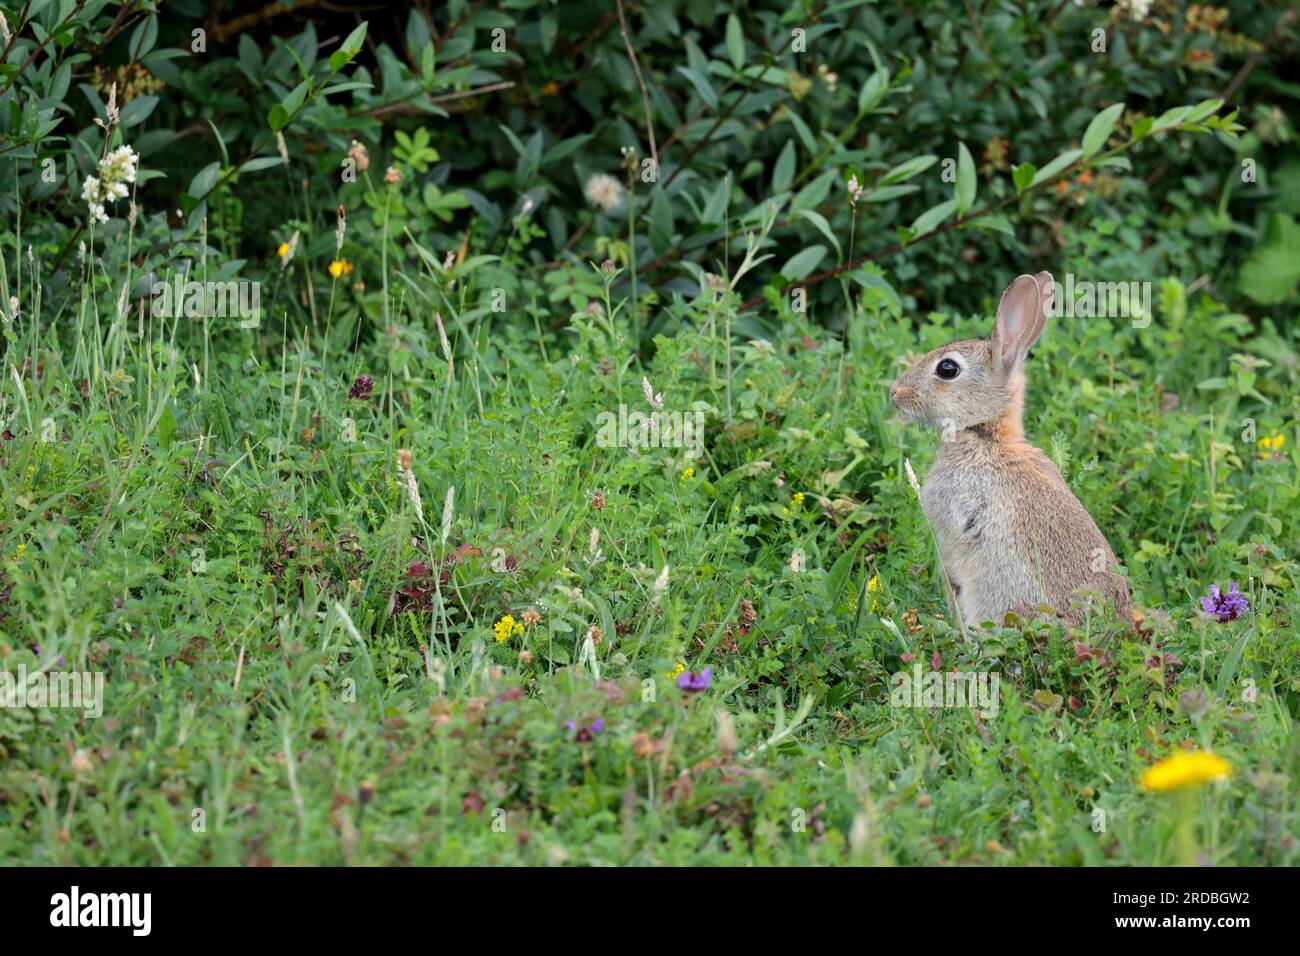 Rabbit Oryctolagus cunniculus, wild rabbit with grey brown fur long ears and  short fluffy tail larger back legs and feet and big eyes eats vegetation Stock Photo